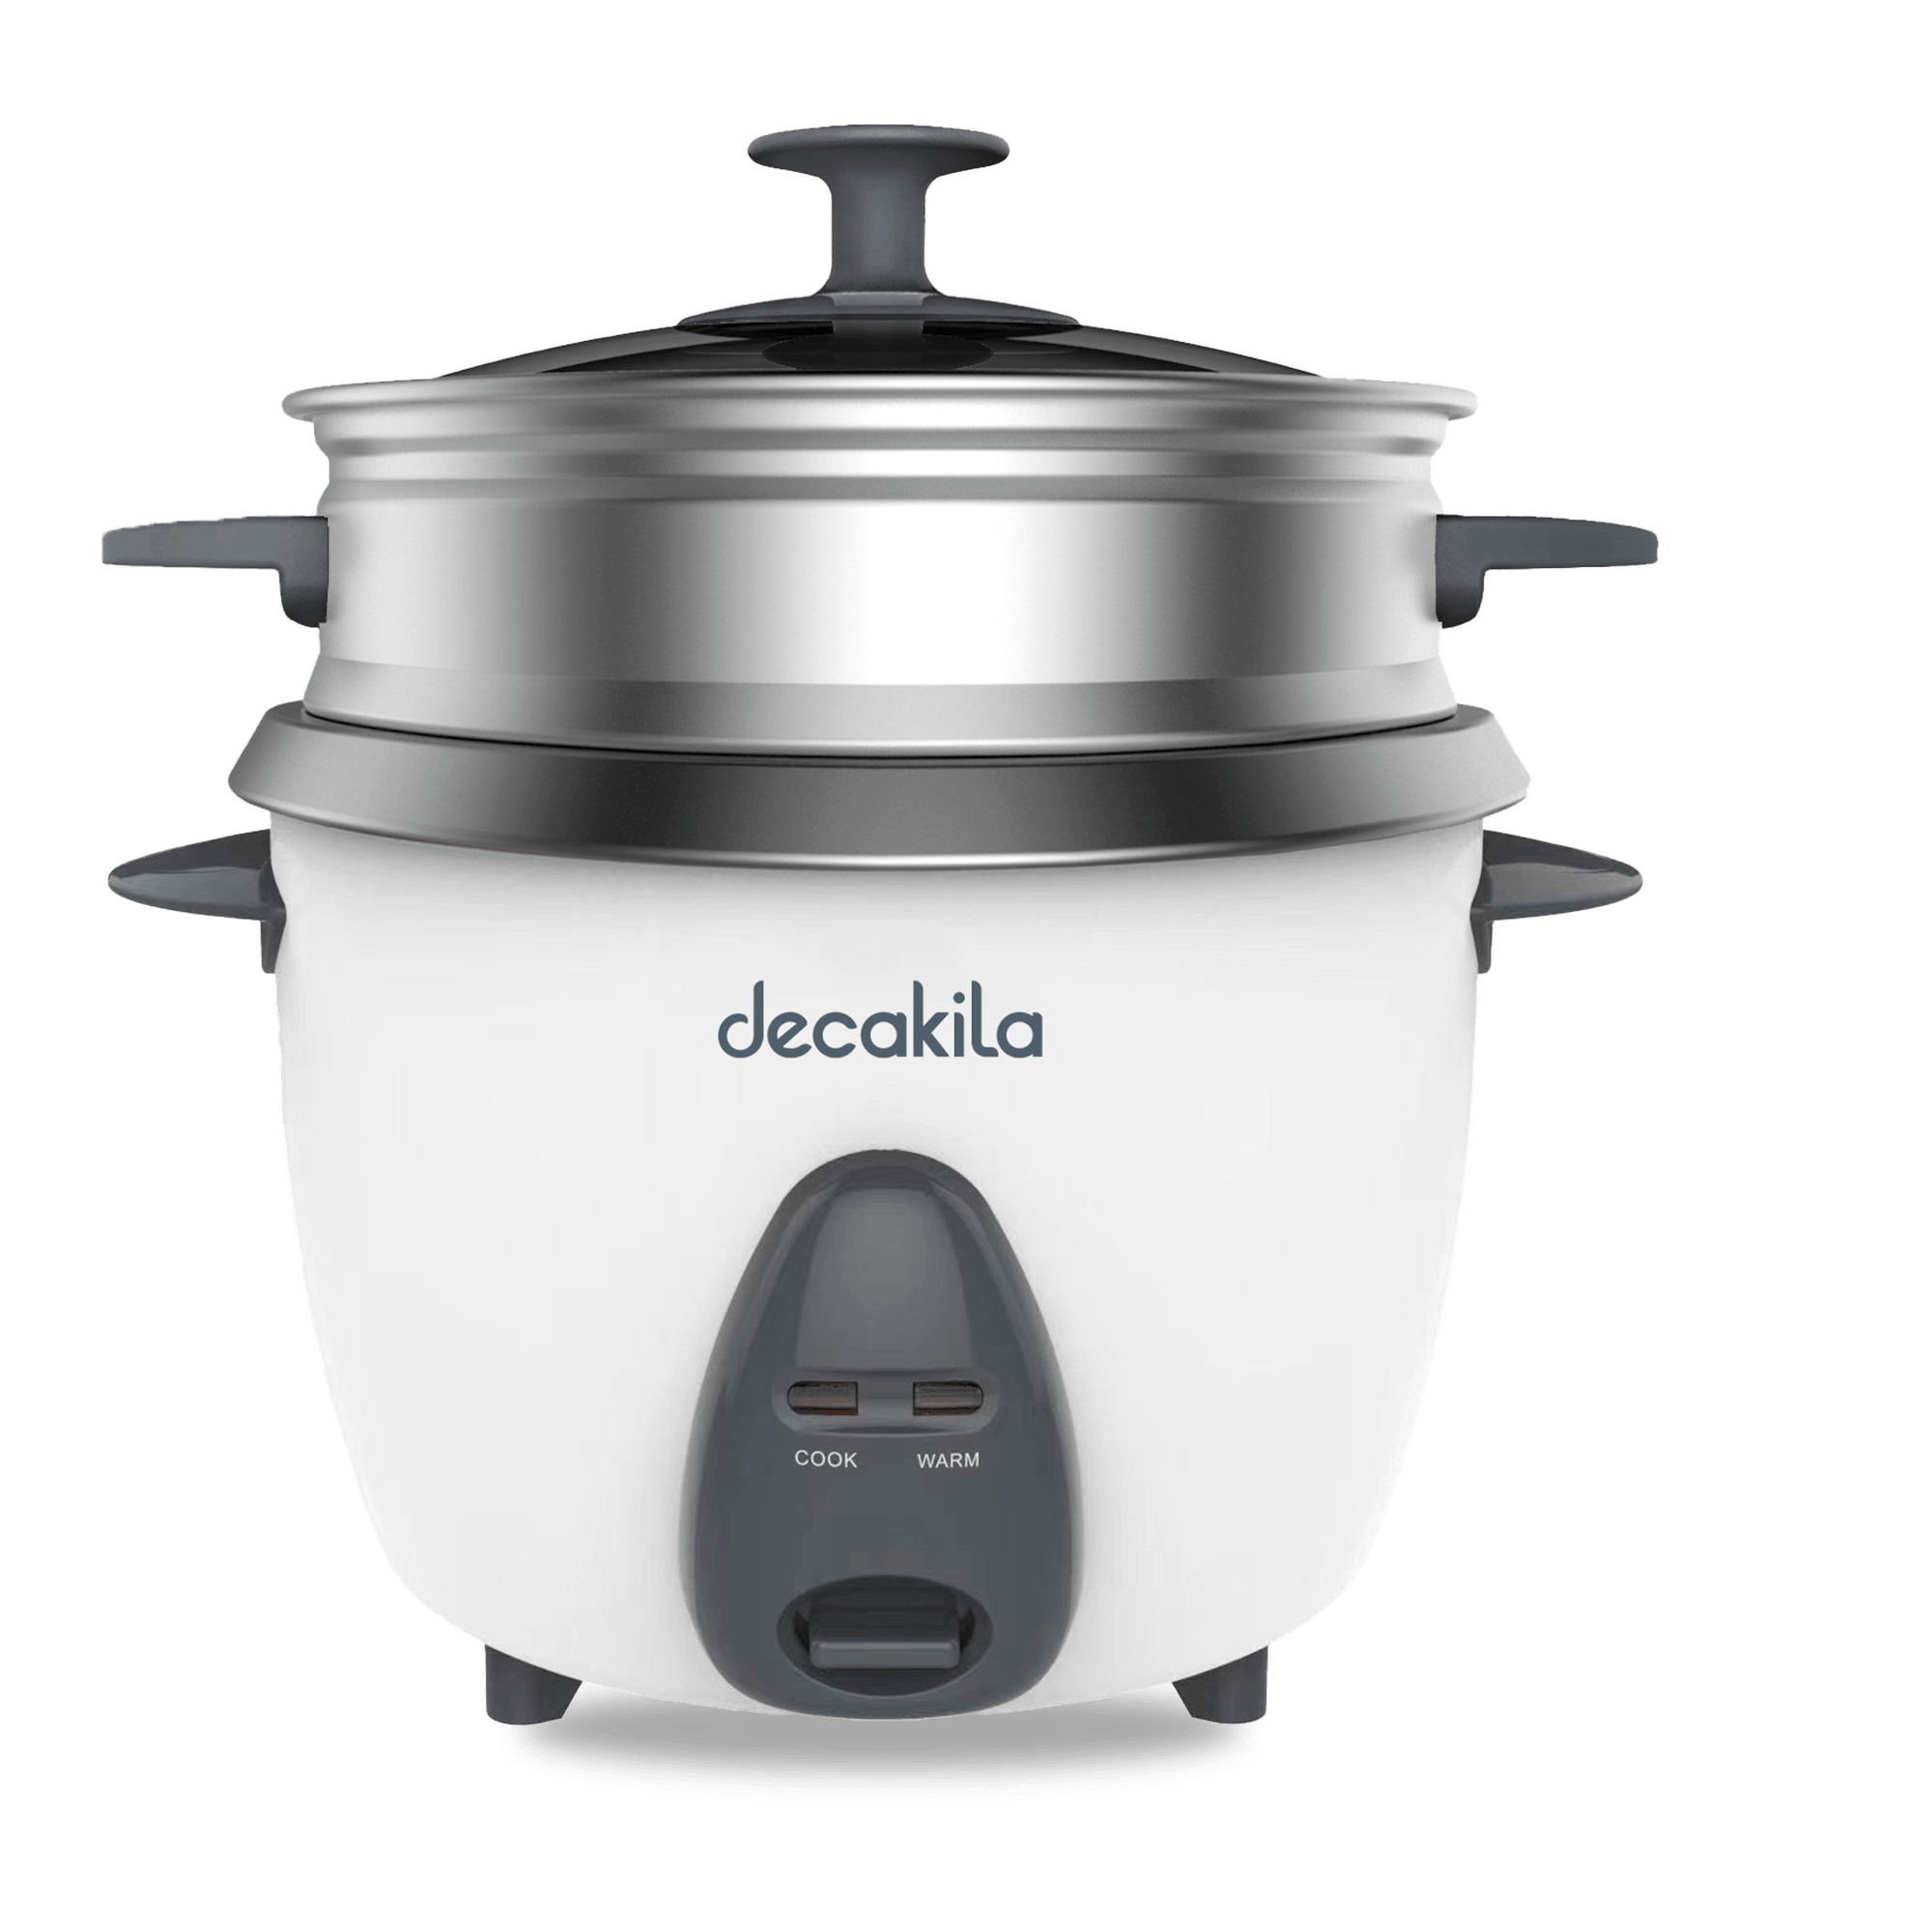 Decakila 1.5L Rice Cooker 500W - KEER033W | Supply Master Accra, Ghana Kitchen Appliances Buy Tools hardware Building materials